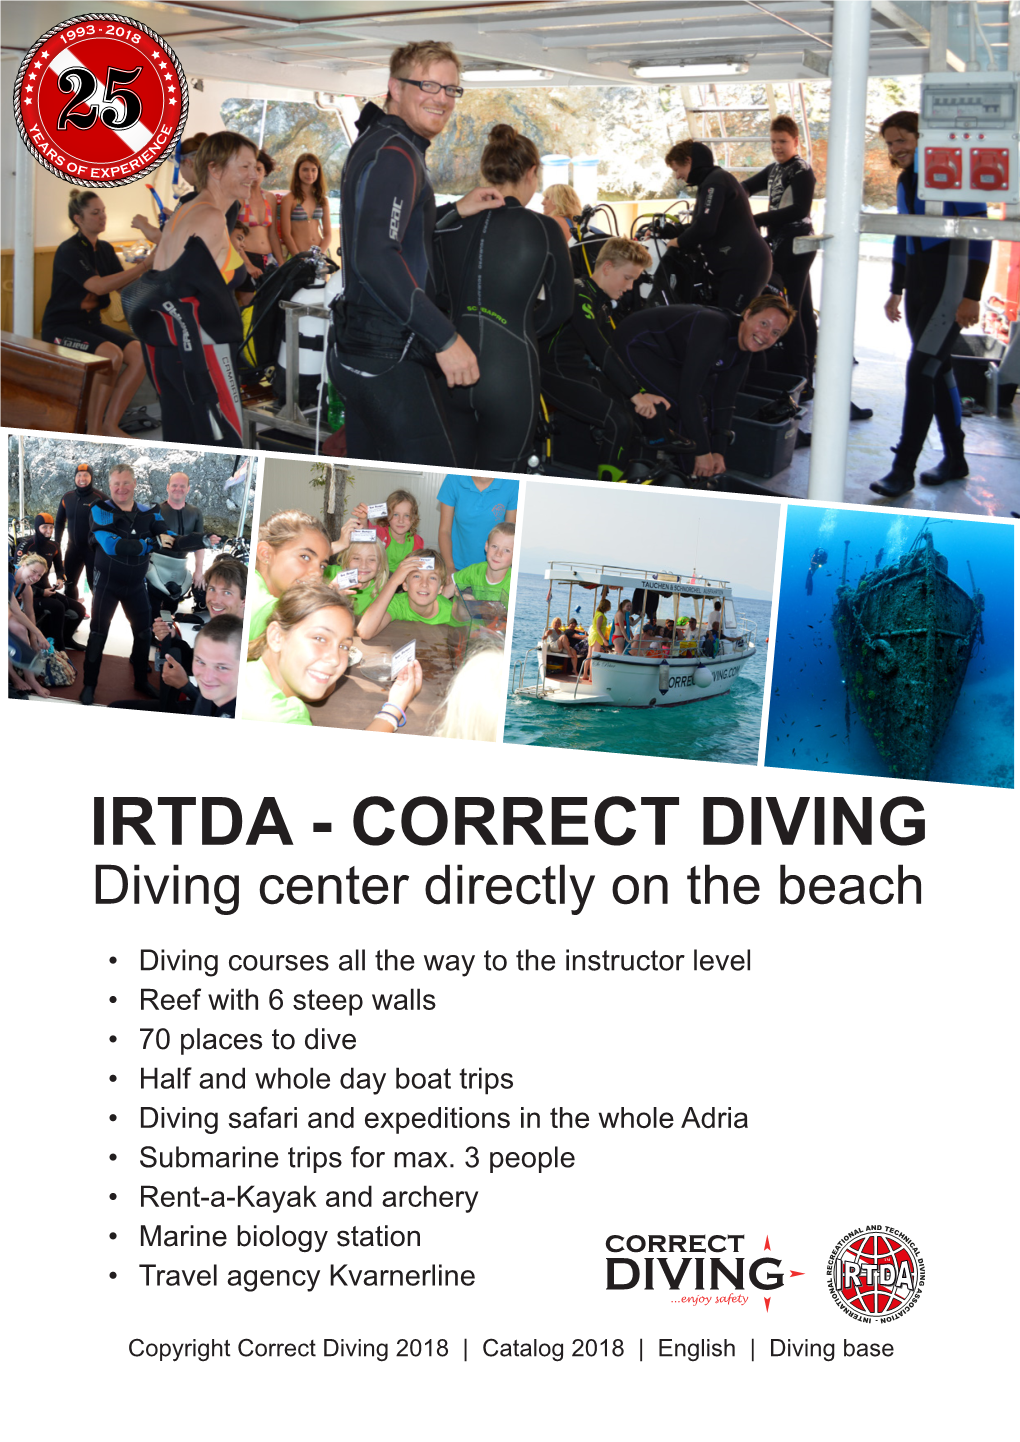 IRTDA - CORRECT DIVING Diving Center Directly on the Beach